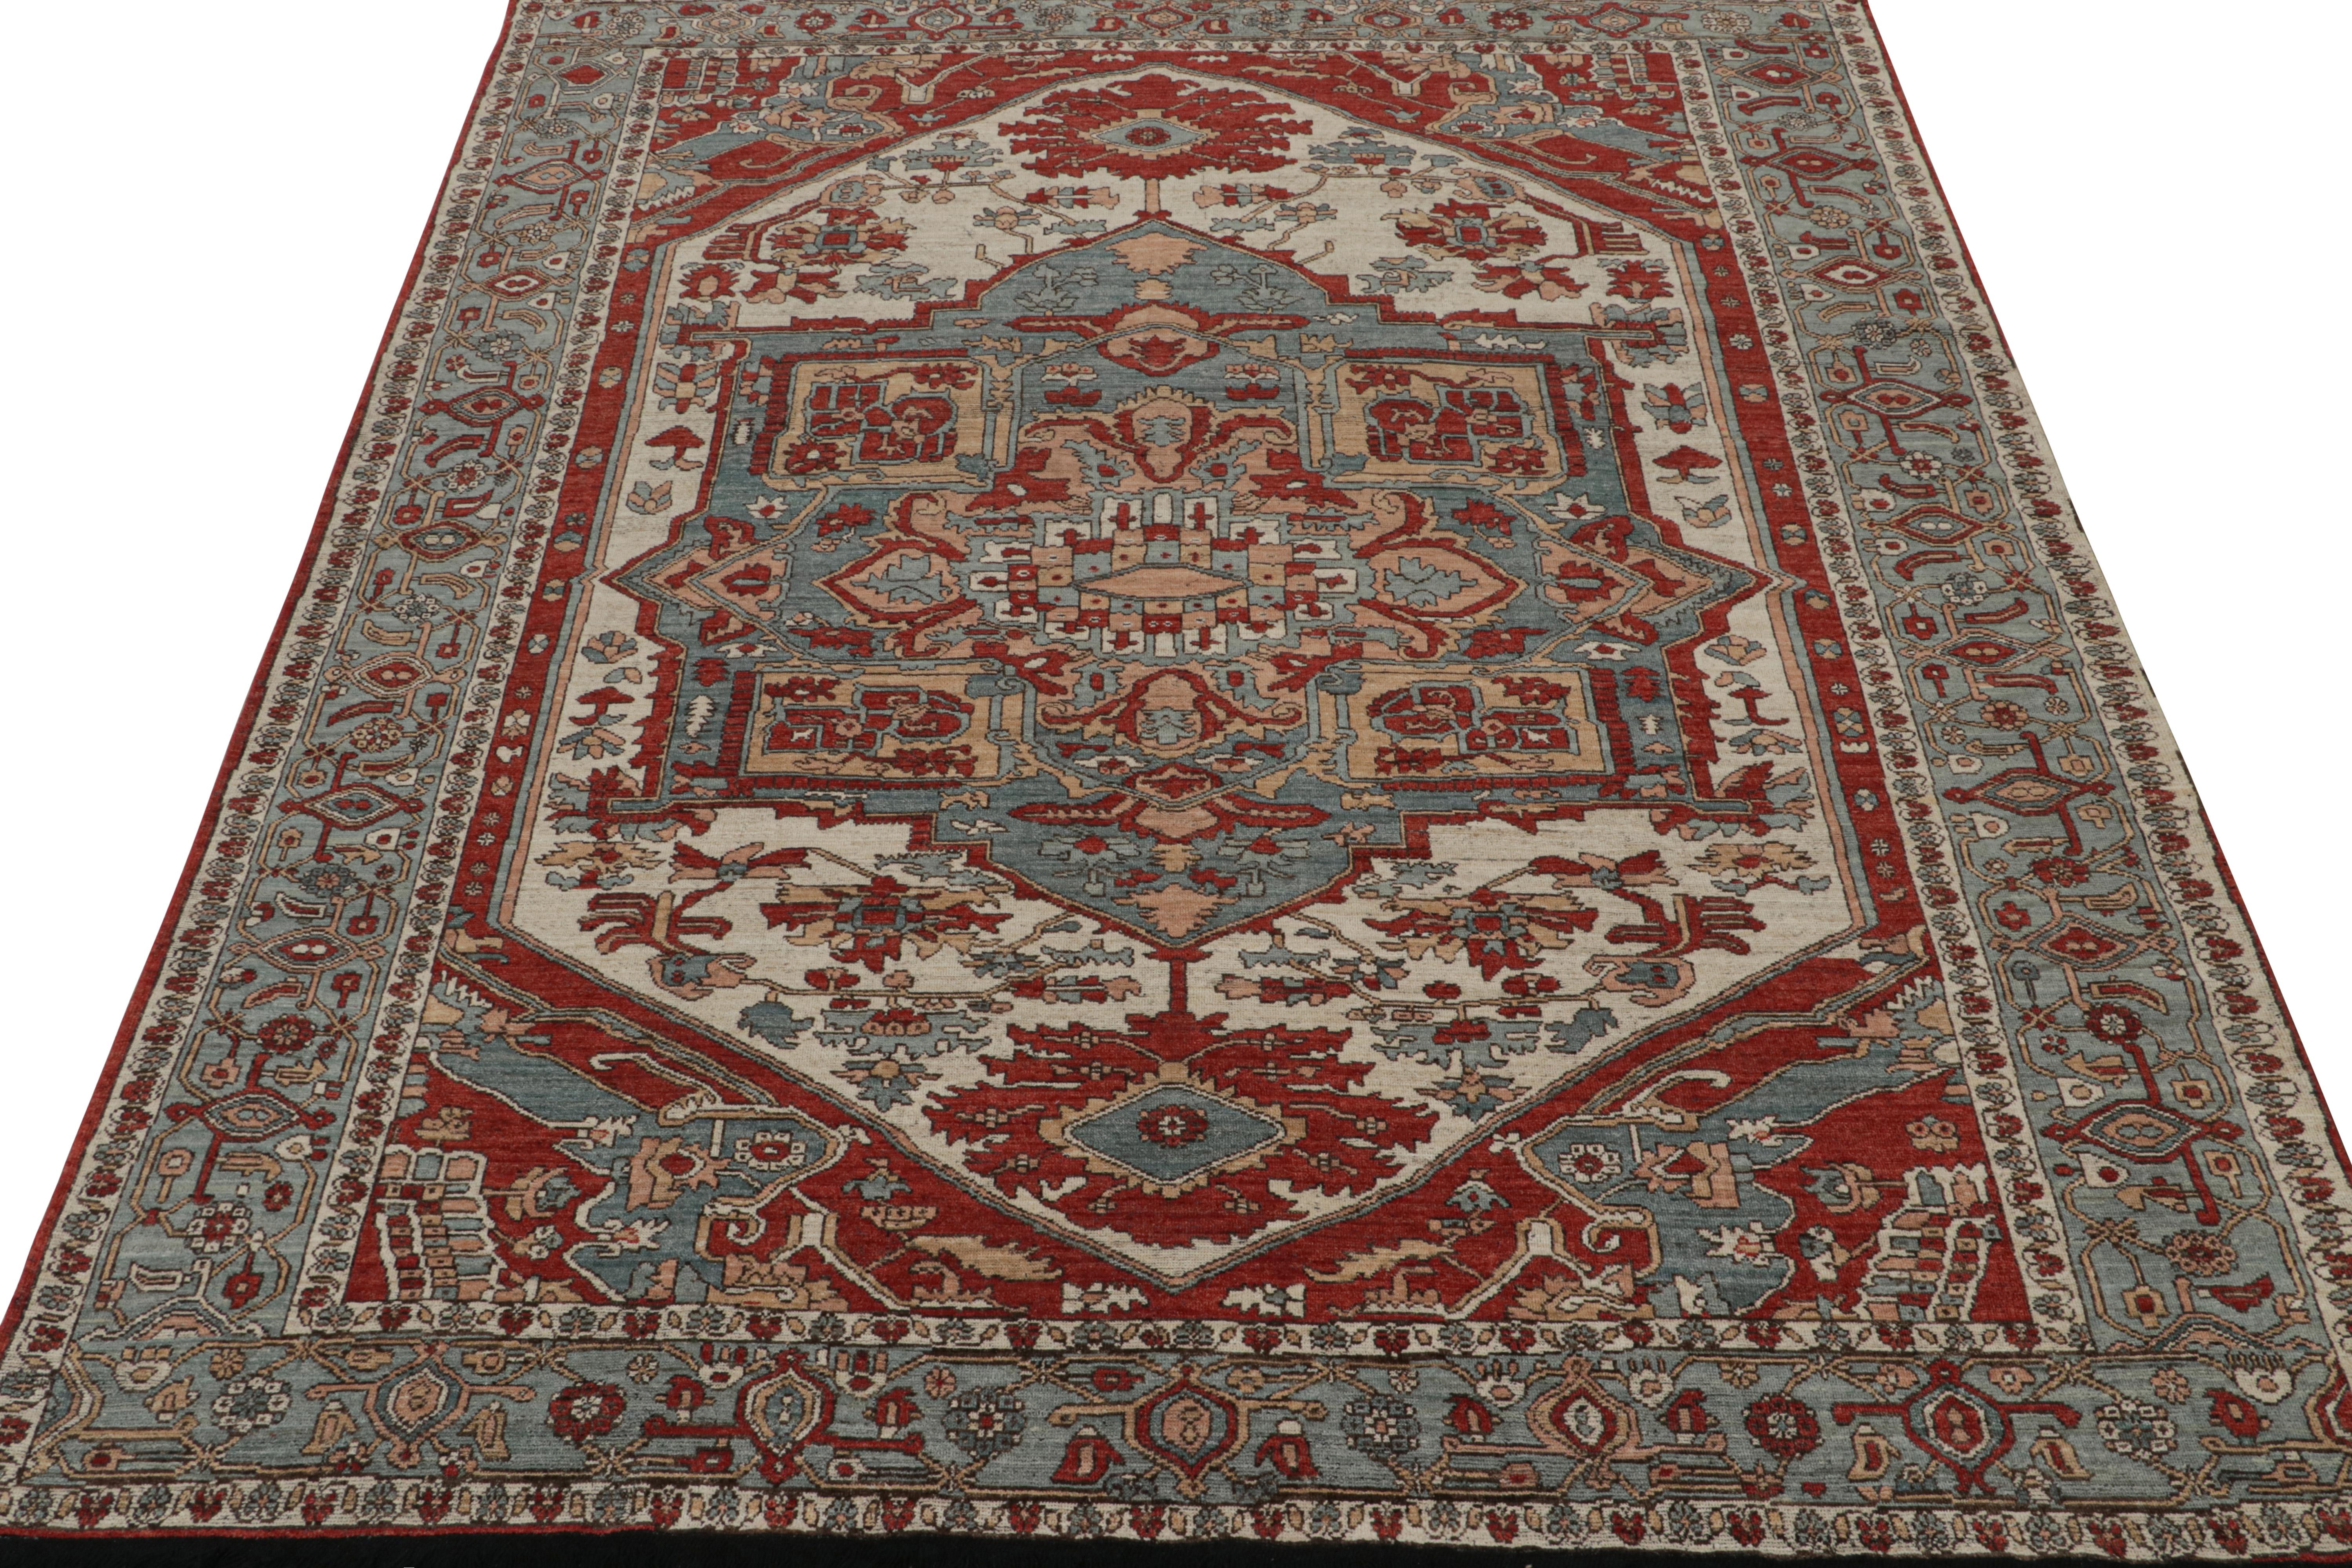 Tribal Rug & Kilim’s Persian Style Rug in Red, Blue & White Patterns For Sale